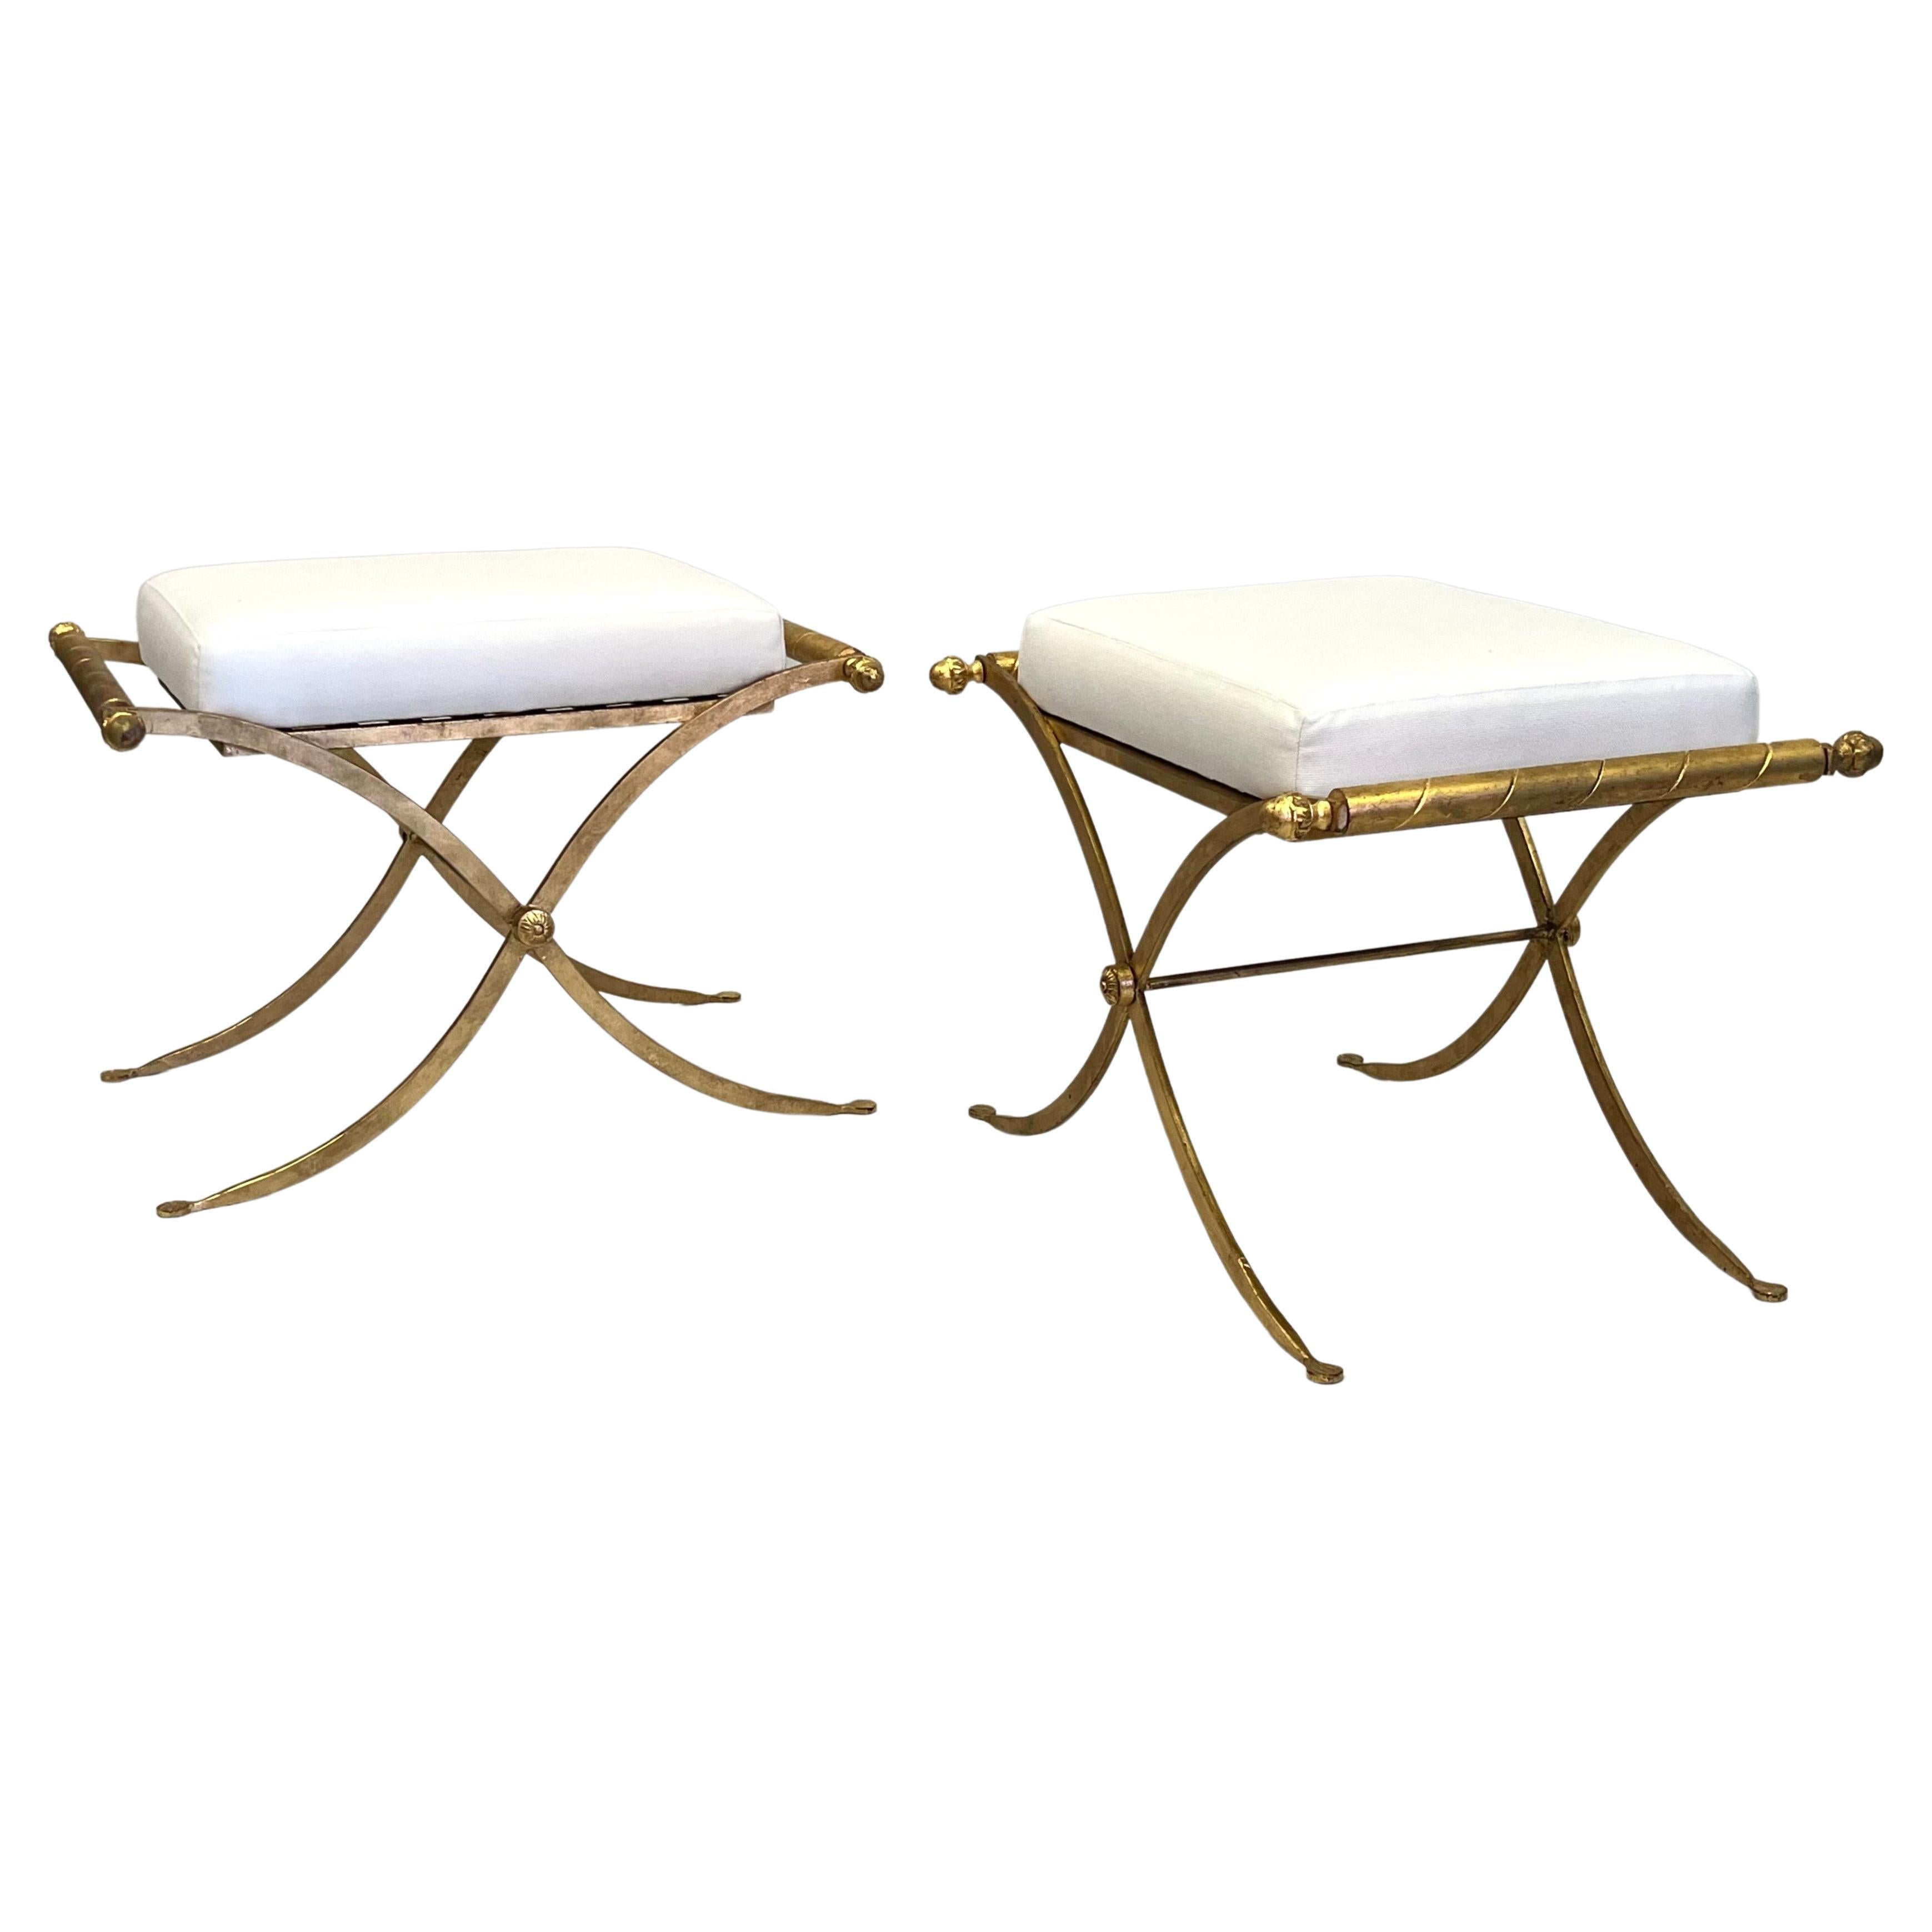 Pair of French Midcentury Modern Neoclassical Gilt Iron Benches, Raymond Subes